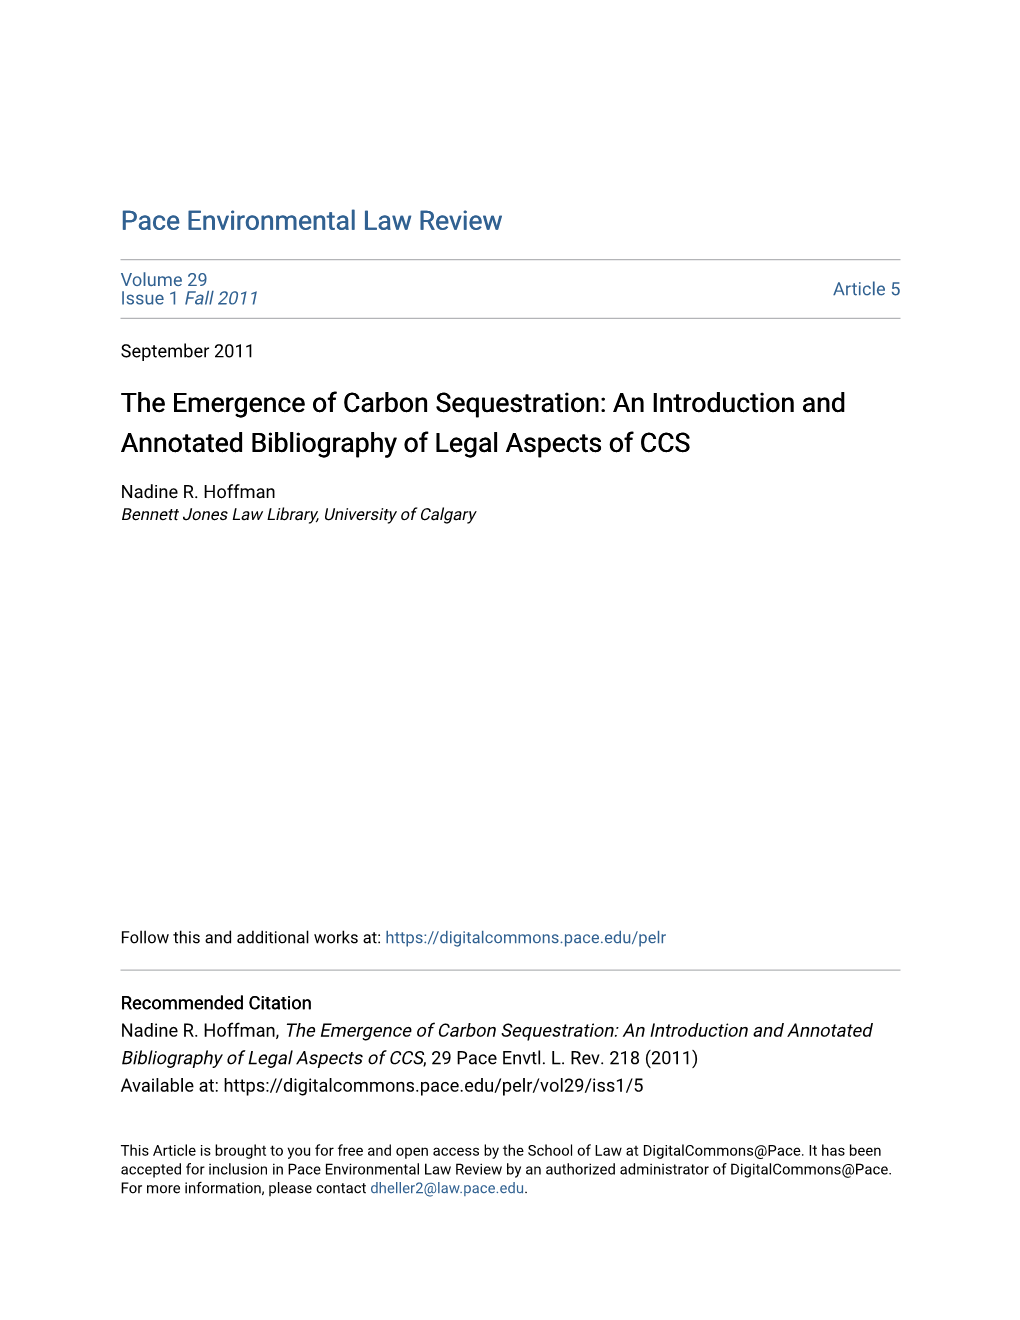 The Emergence of Carbon Sequestration: an Introduction and Annotated Bibliography of Legal Aspects of CCS